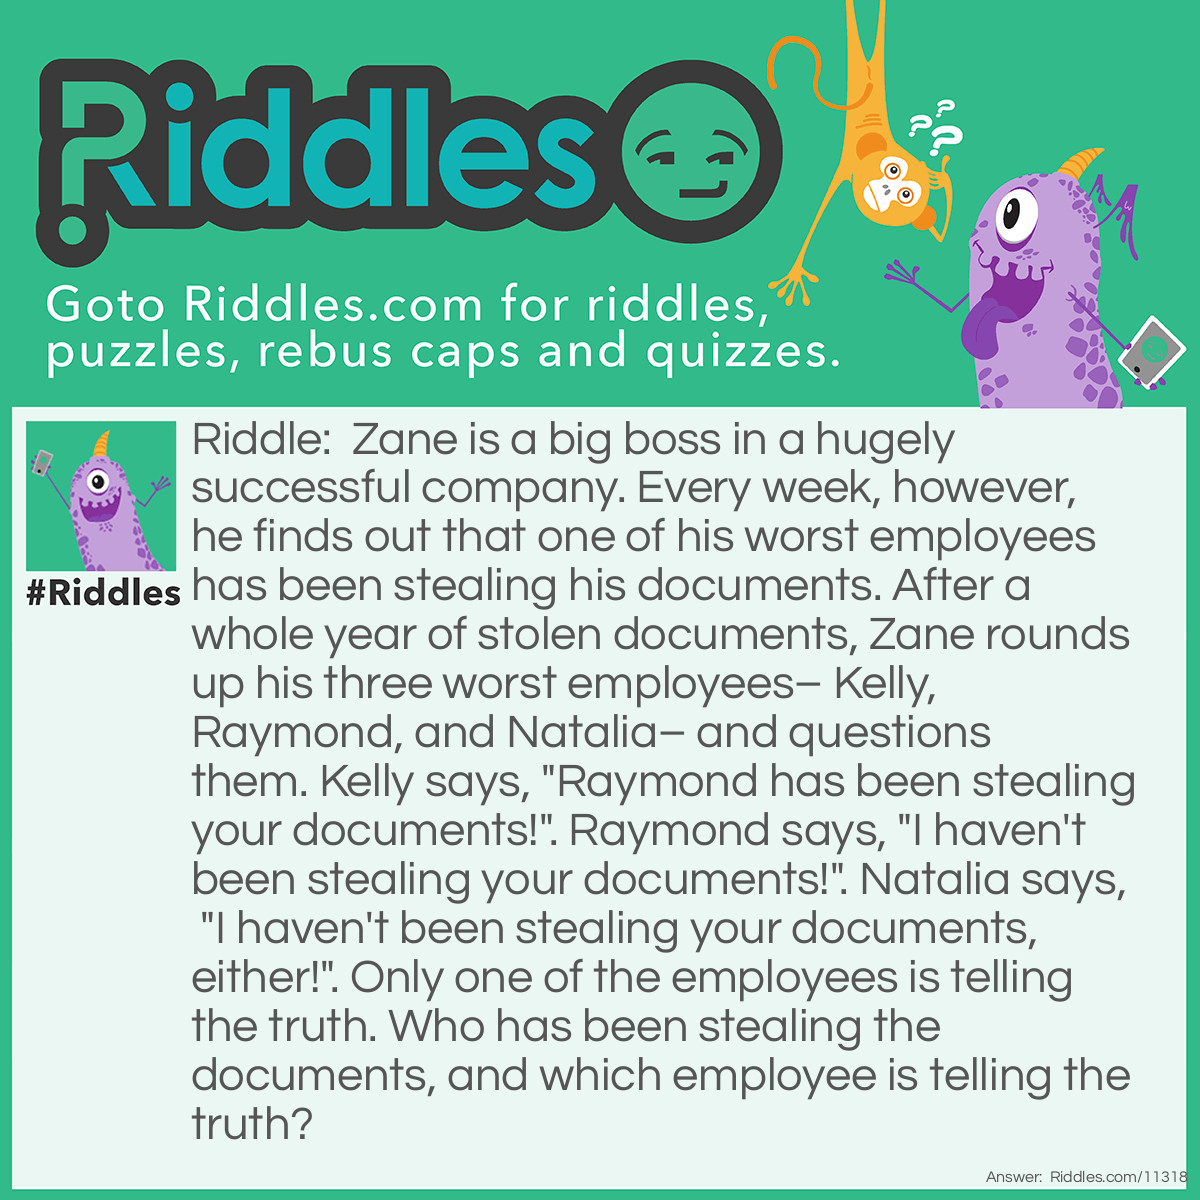 Riddle: Zane is a big boss in a hugely successful company. Every week, however, he finds out that one of his worst employees has been stealing his documents. After a whole year of stolen documents, Zane rounds up his three worst employees– Kelly, Raymond, and Natalia– and questions them. Kelly says, "Raymond has been stealing your documents!". Raymond says, "I haven't been stealing your documents!". Natalia says, "I haven't been stealing your documents, either!". Only one of the employees is telling the truth. Who has been stealing the documents, and which employee is telling the truth? Answer: Natalia has been stealing the documents. Raymond is telling the truth. If Kelly was the one stealing the documents, then she would be lying, and Raymond would be telling the truth. But then, Natalia would also be telling the truth, which goes against the condition that only one employee is telling the truth. If Raymond was the one stealing the documents, then he would be lying, Kelly would be telling the truth, and Natalia would also be telling the truth. This also contradicts that only one employee is honest. If Natalia was the one stealing the documents, then she is lying. But then, who is telling the truth? It's not Kelly, because if it was so, both she and Natalia would be telling the truth, and Raymond would be lying, which doesn't meet the requirements. Therefore, Raymond is telling the truth, Kelly and Natalia are both lying, and Natalia is the one stealing the documents.